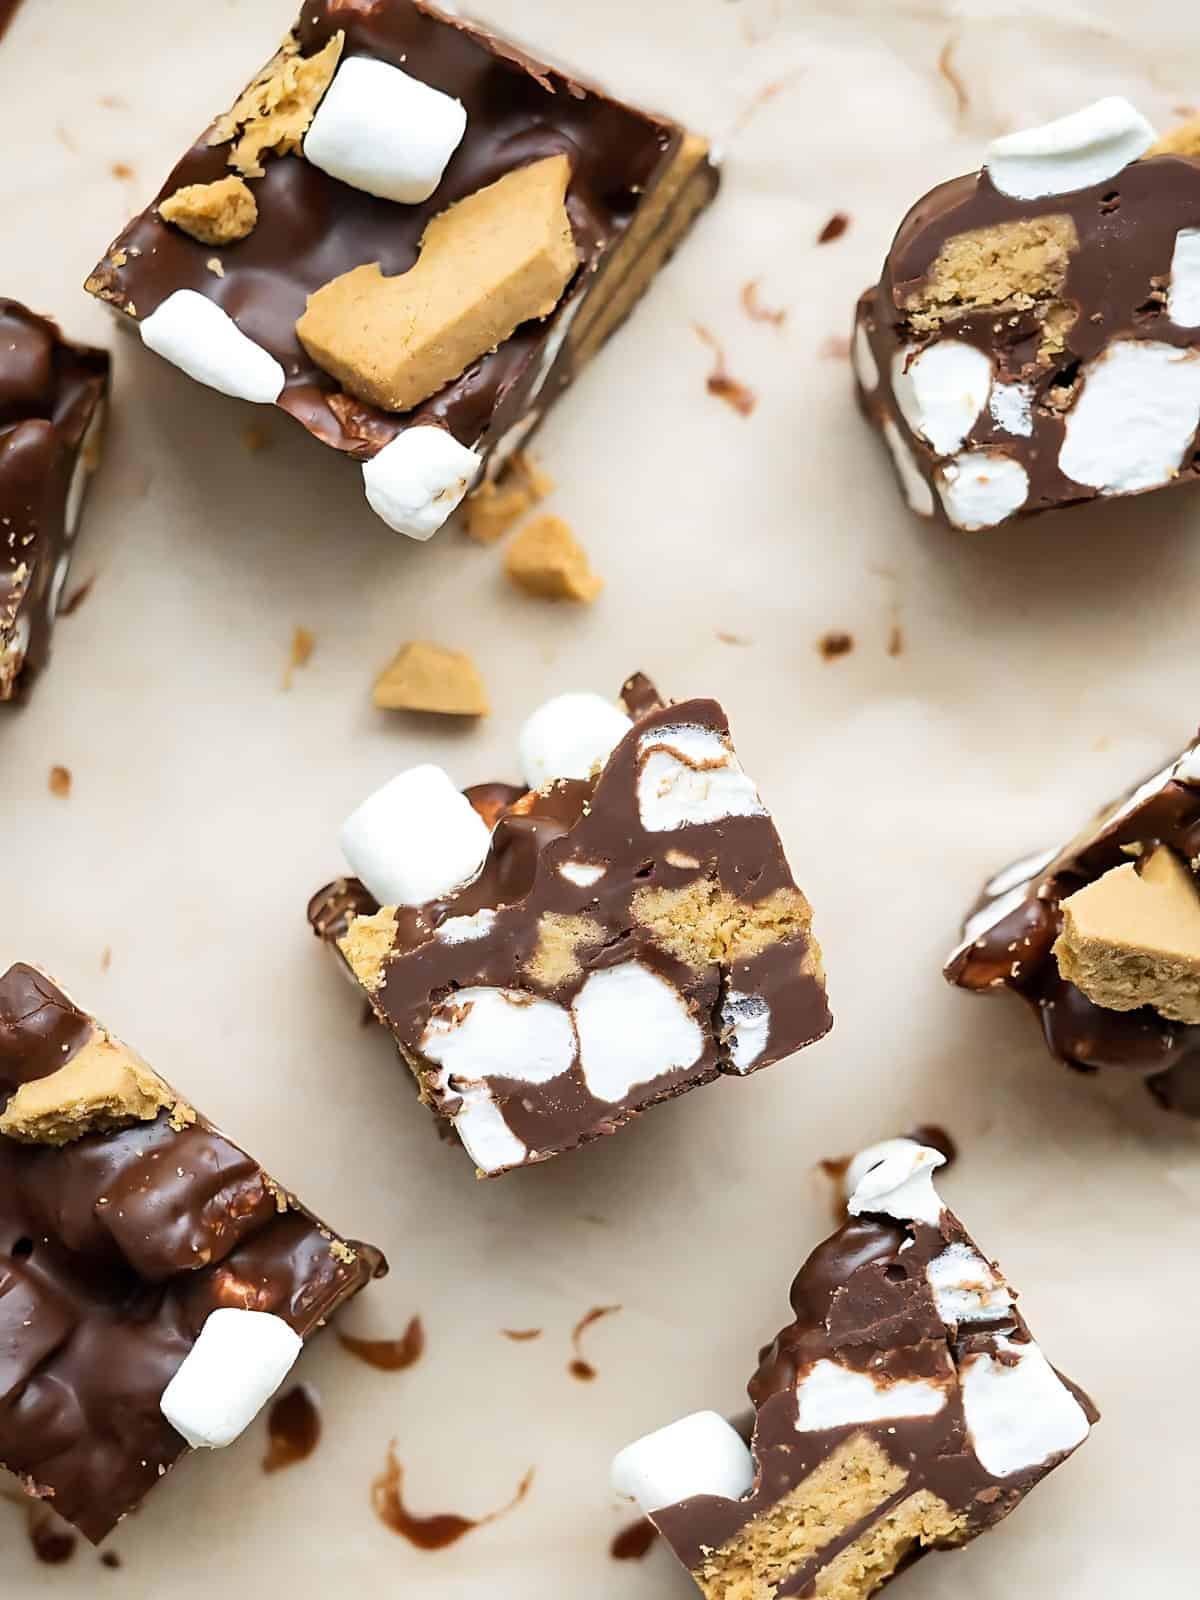 Square cute of smores rocky road on a baking sheet.